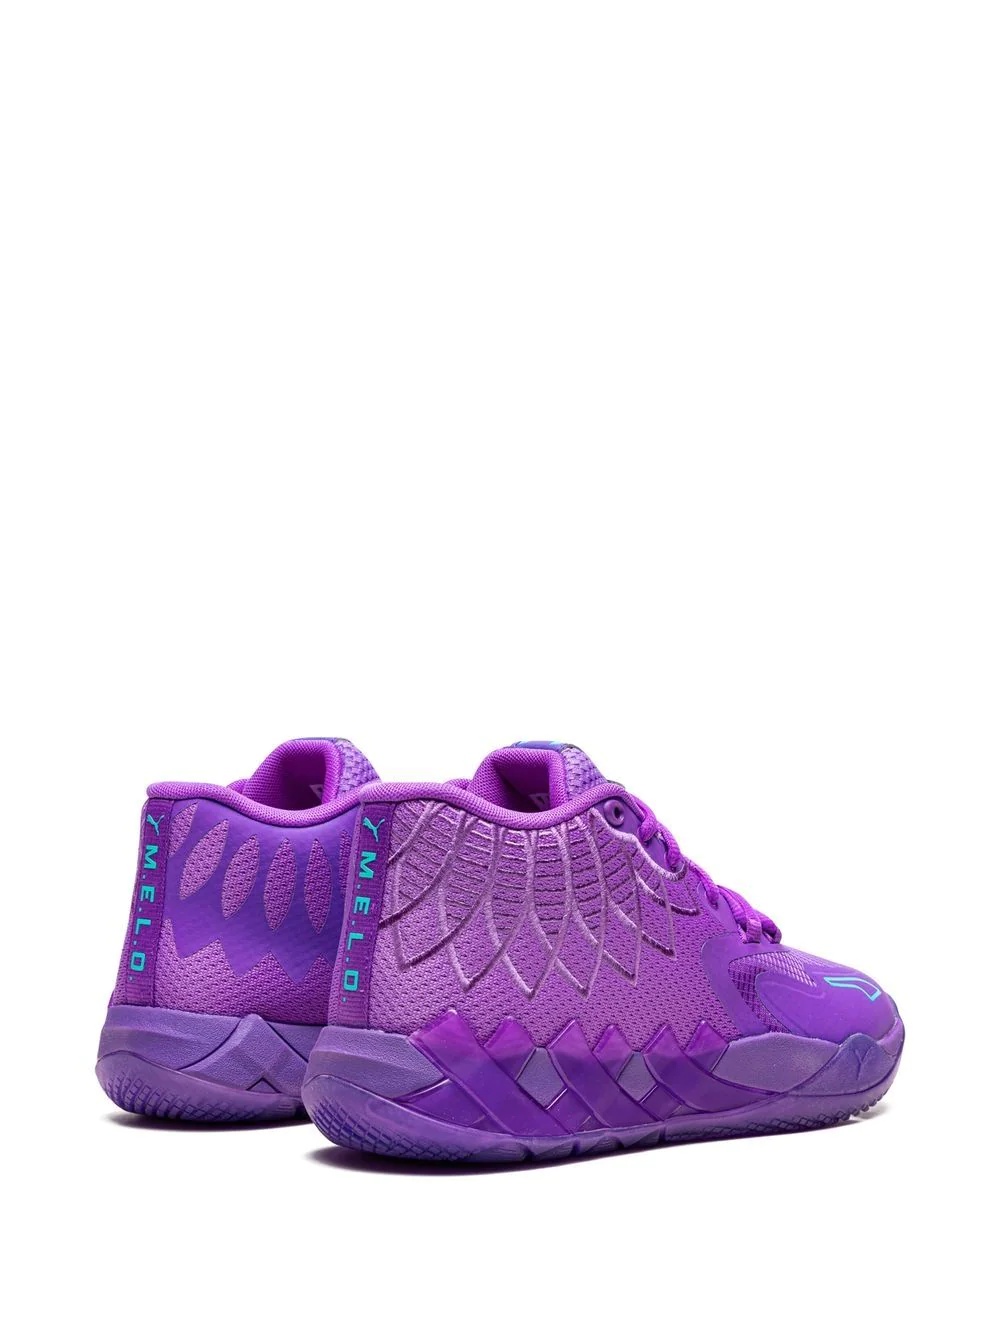 MB1 "Lamelo Ball Queen City" sneakers - 3